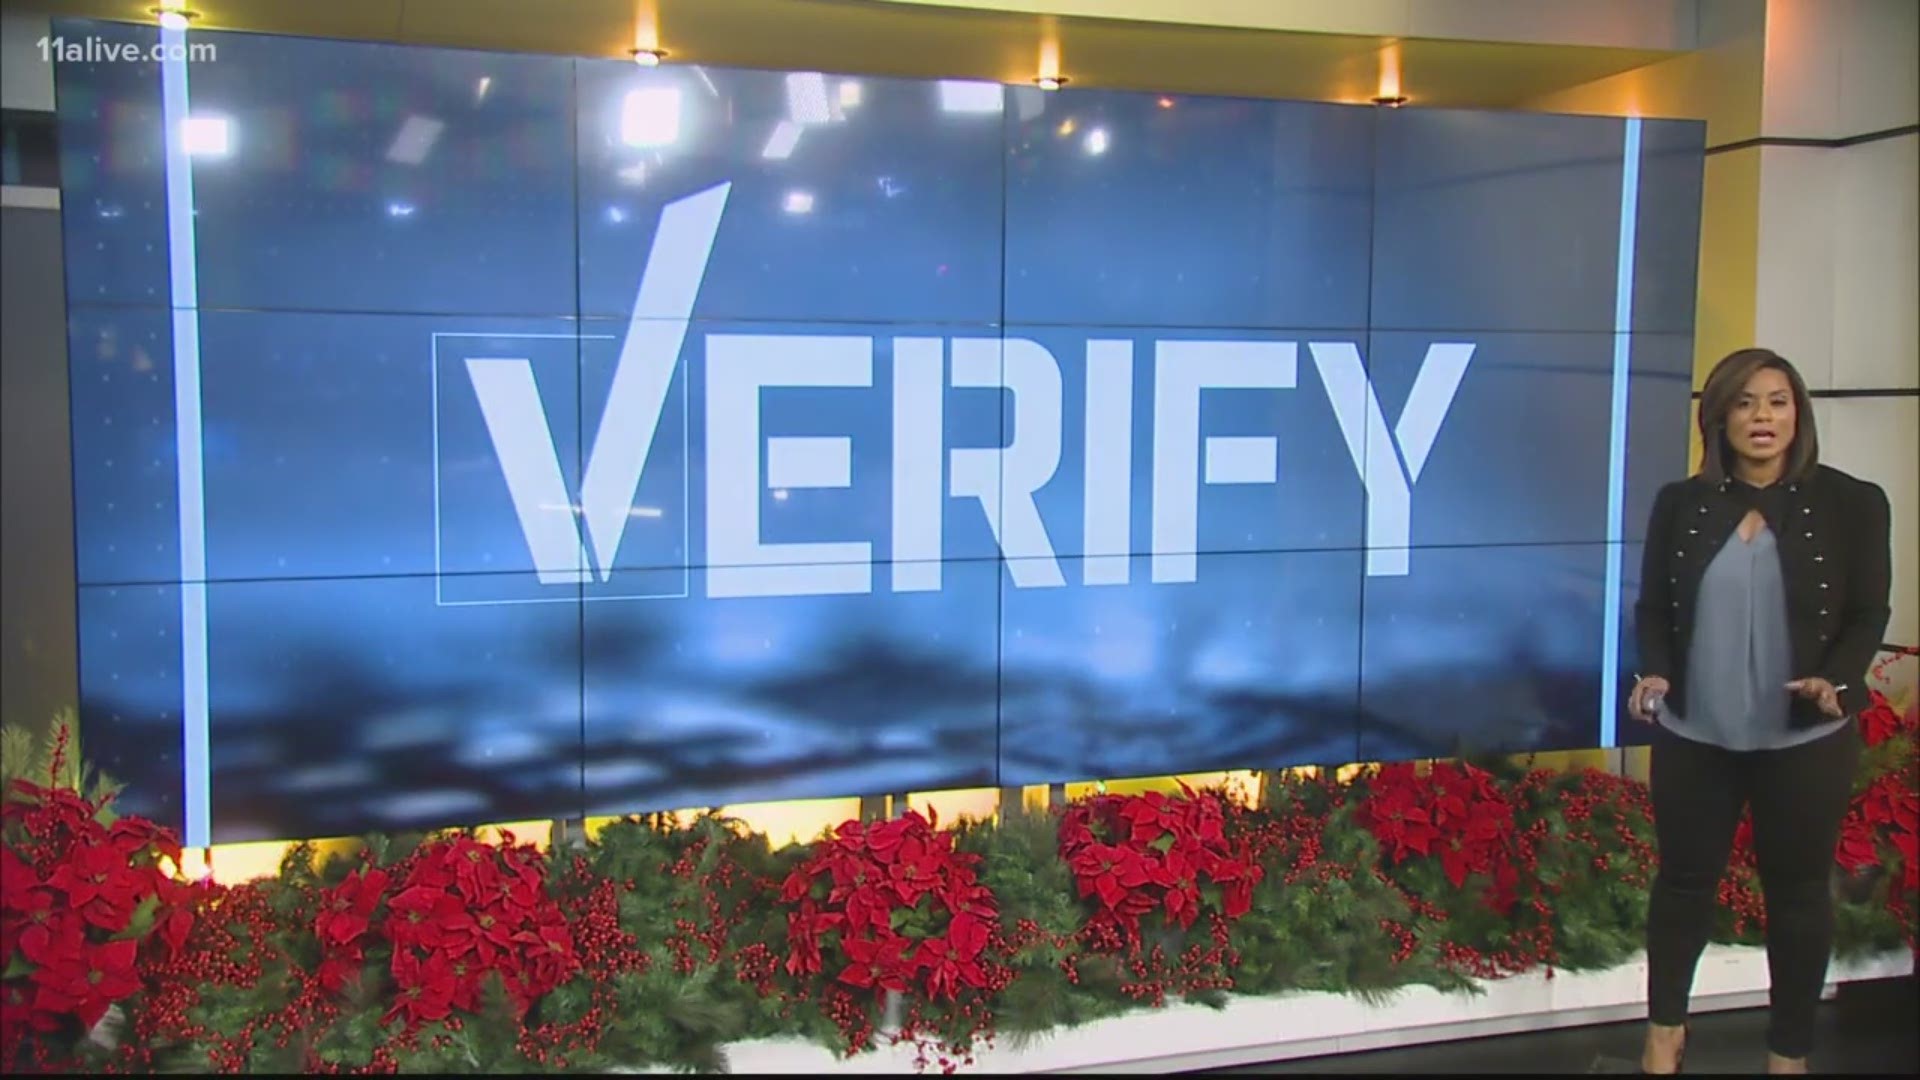 Each Christmas season pet owners become concerned about poinsettias and their danger to pets. Liza Lucas spoke to experts to VERIFY those claims.